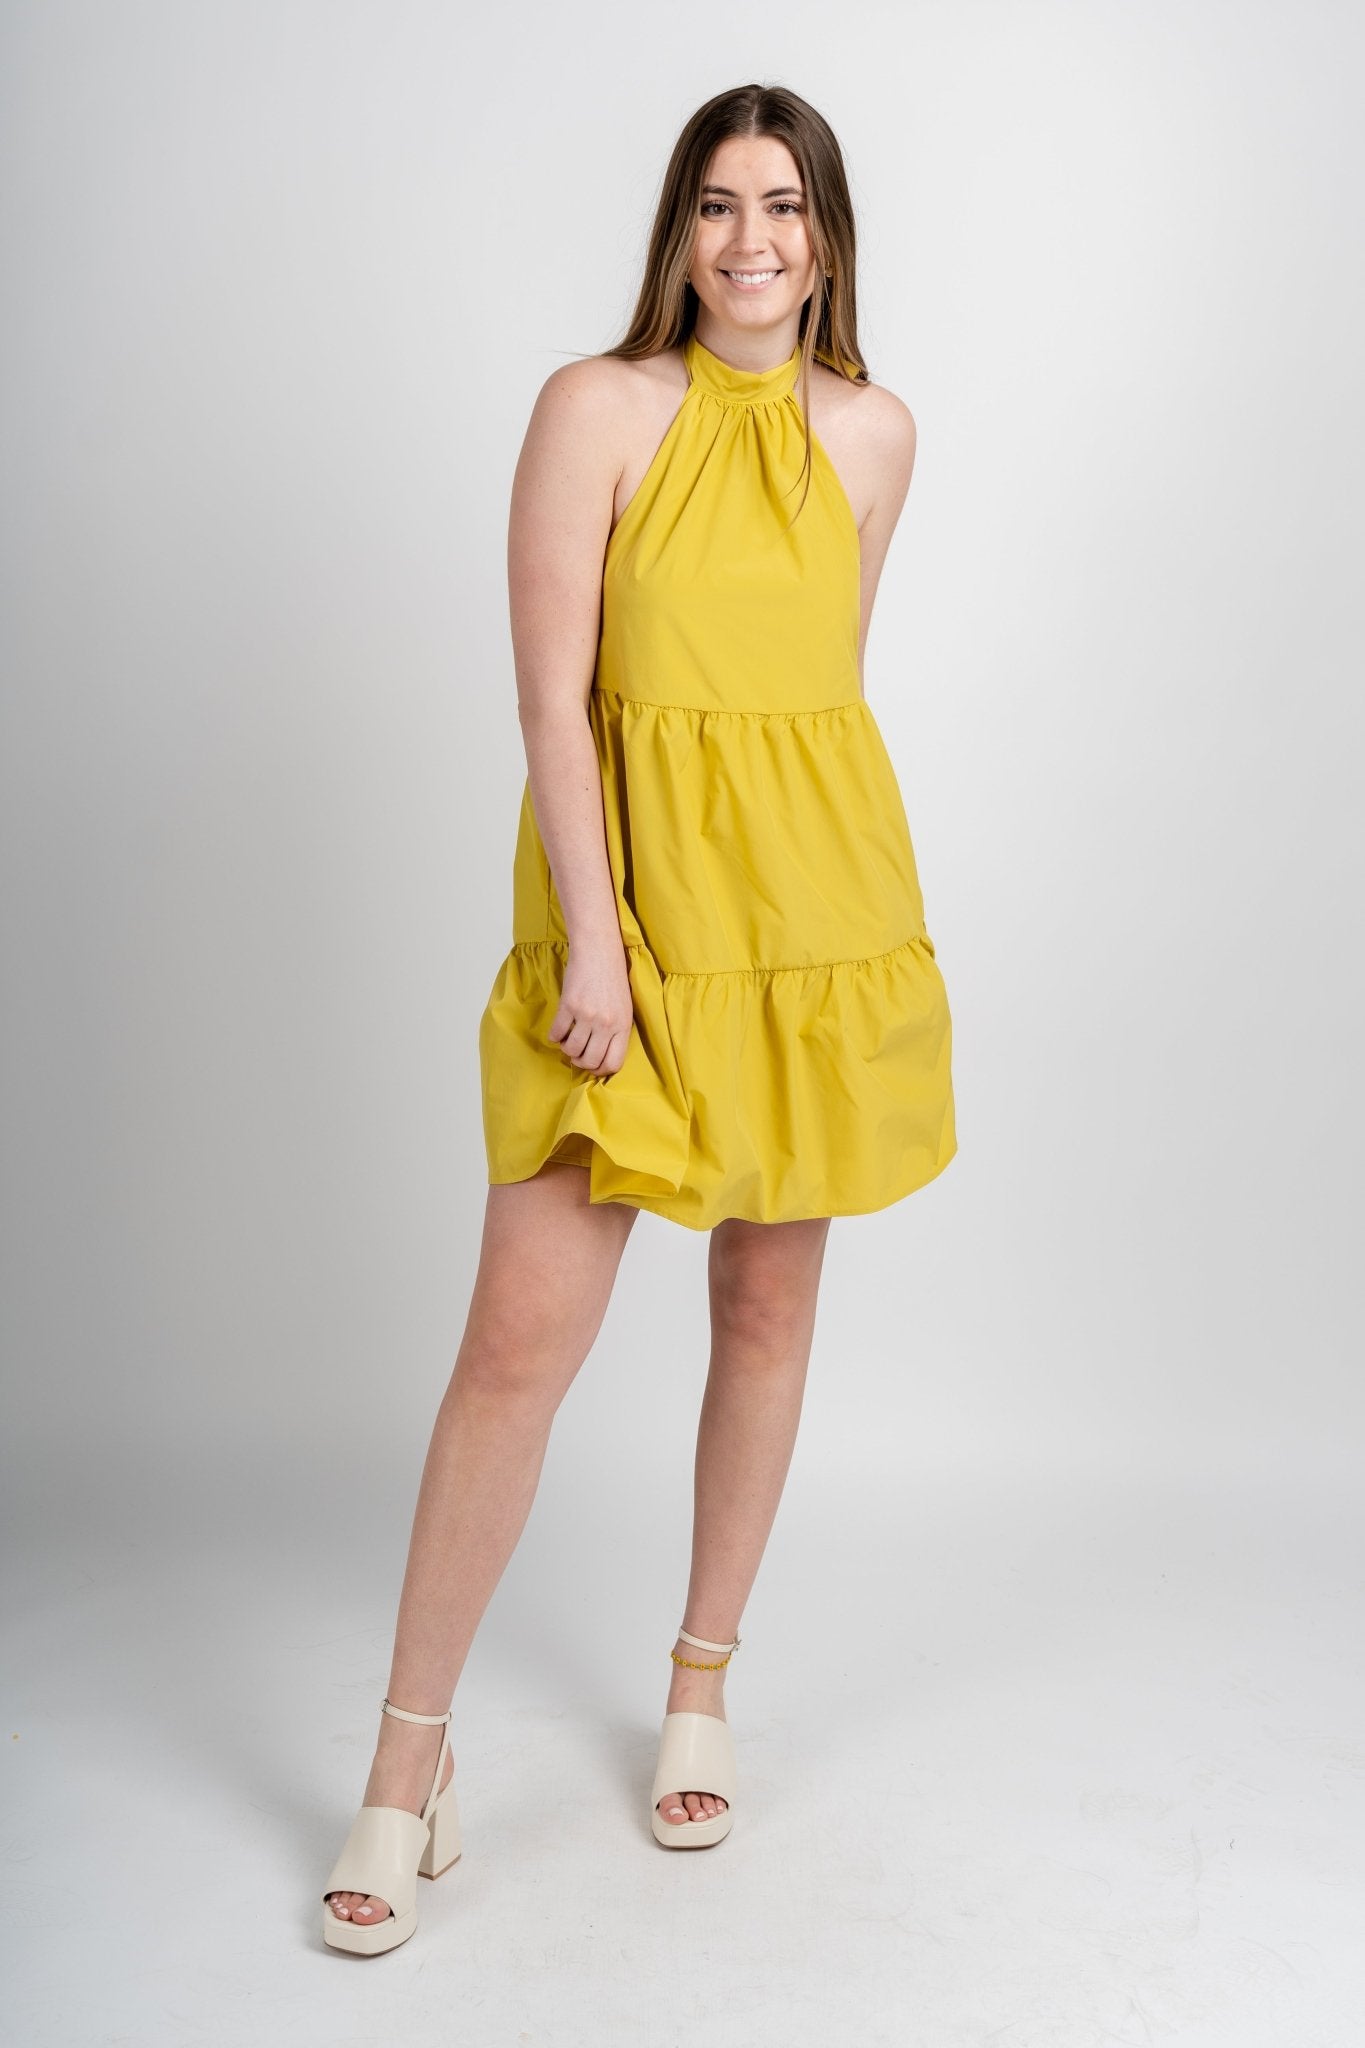 Halter neck tiered dress chartreuse - Trendy Dress - Fashion Dresses at Lush Fashion Lounge Boutique in Oklahoma City